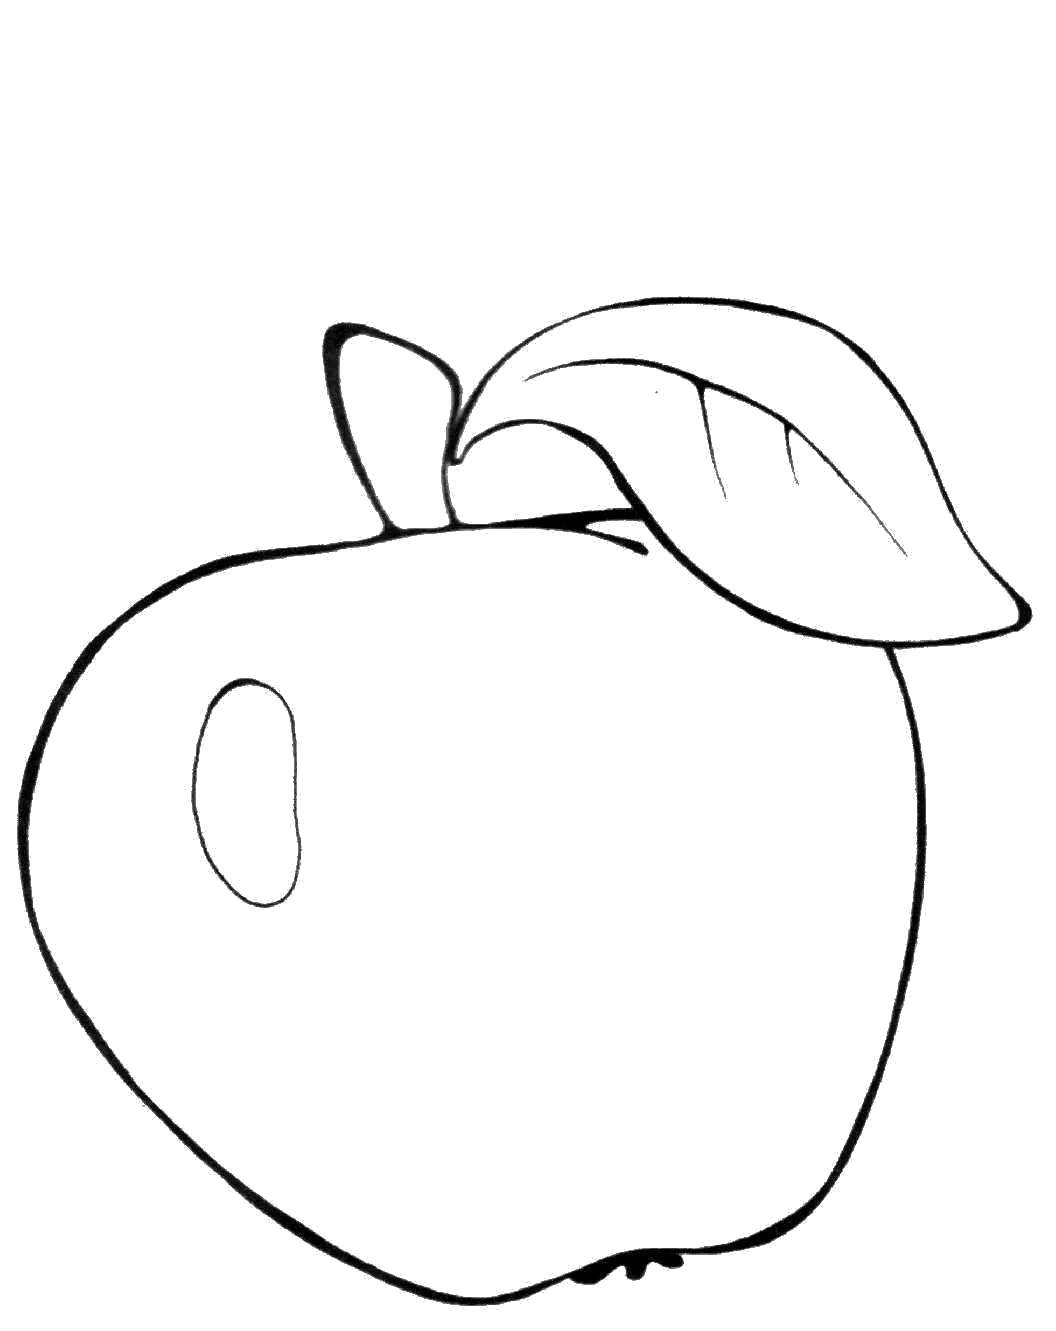 Coloring Juicy Apple. Category fruits. Tags:  fruit, Apple.